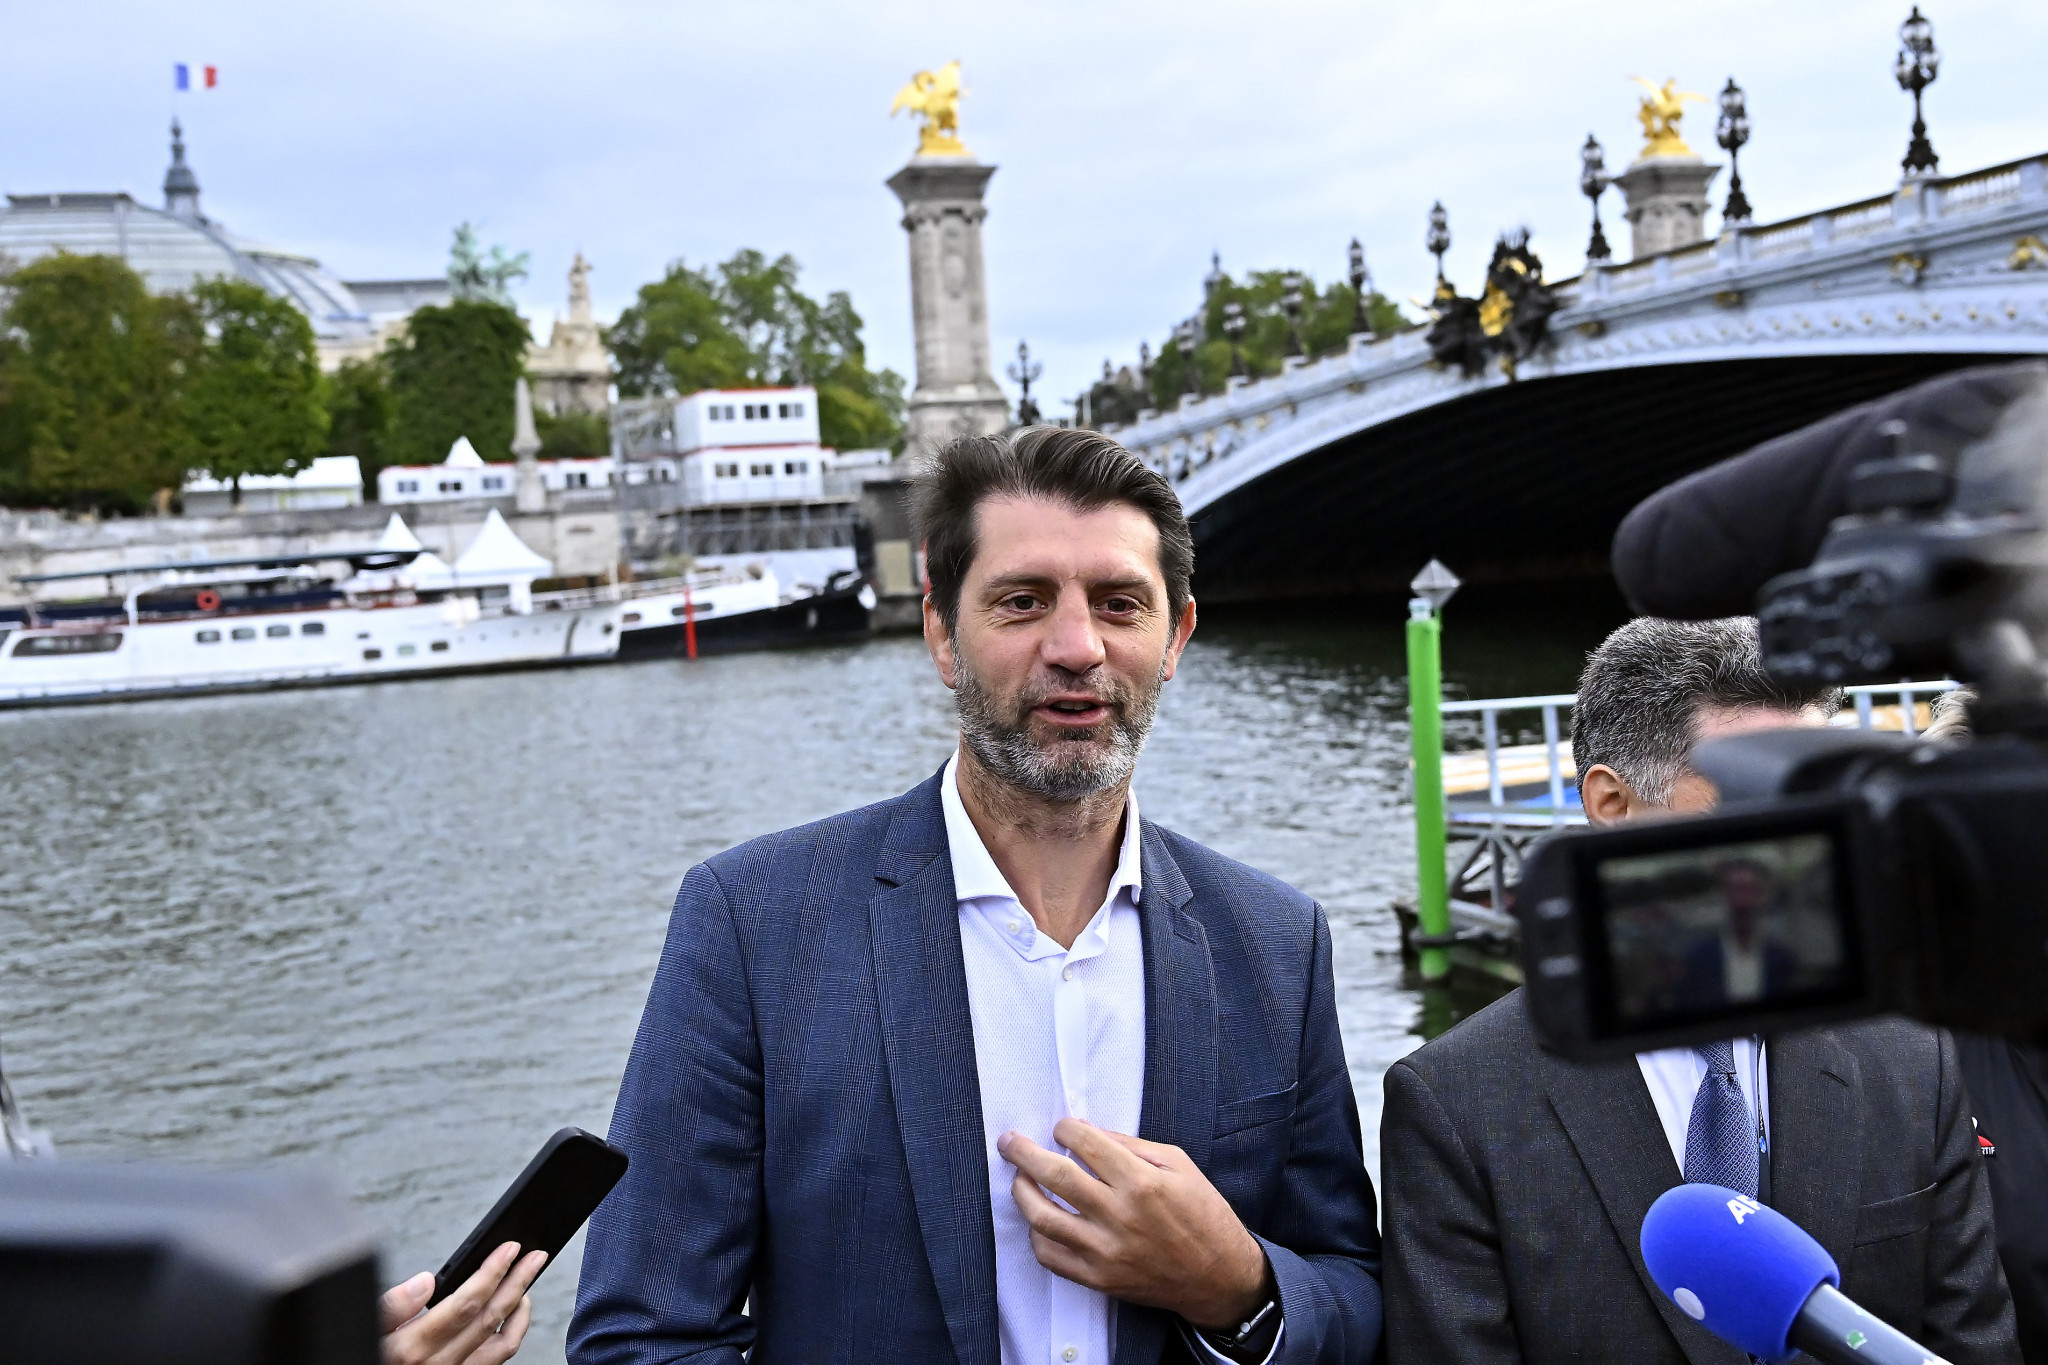 Paris Deputy Mayor for Sports Pierre Rabadan said Olympic and Paralympic test events had led to plans for 